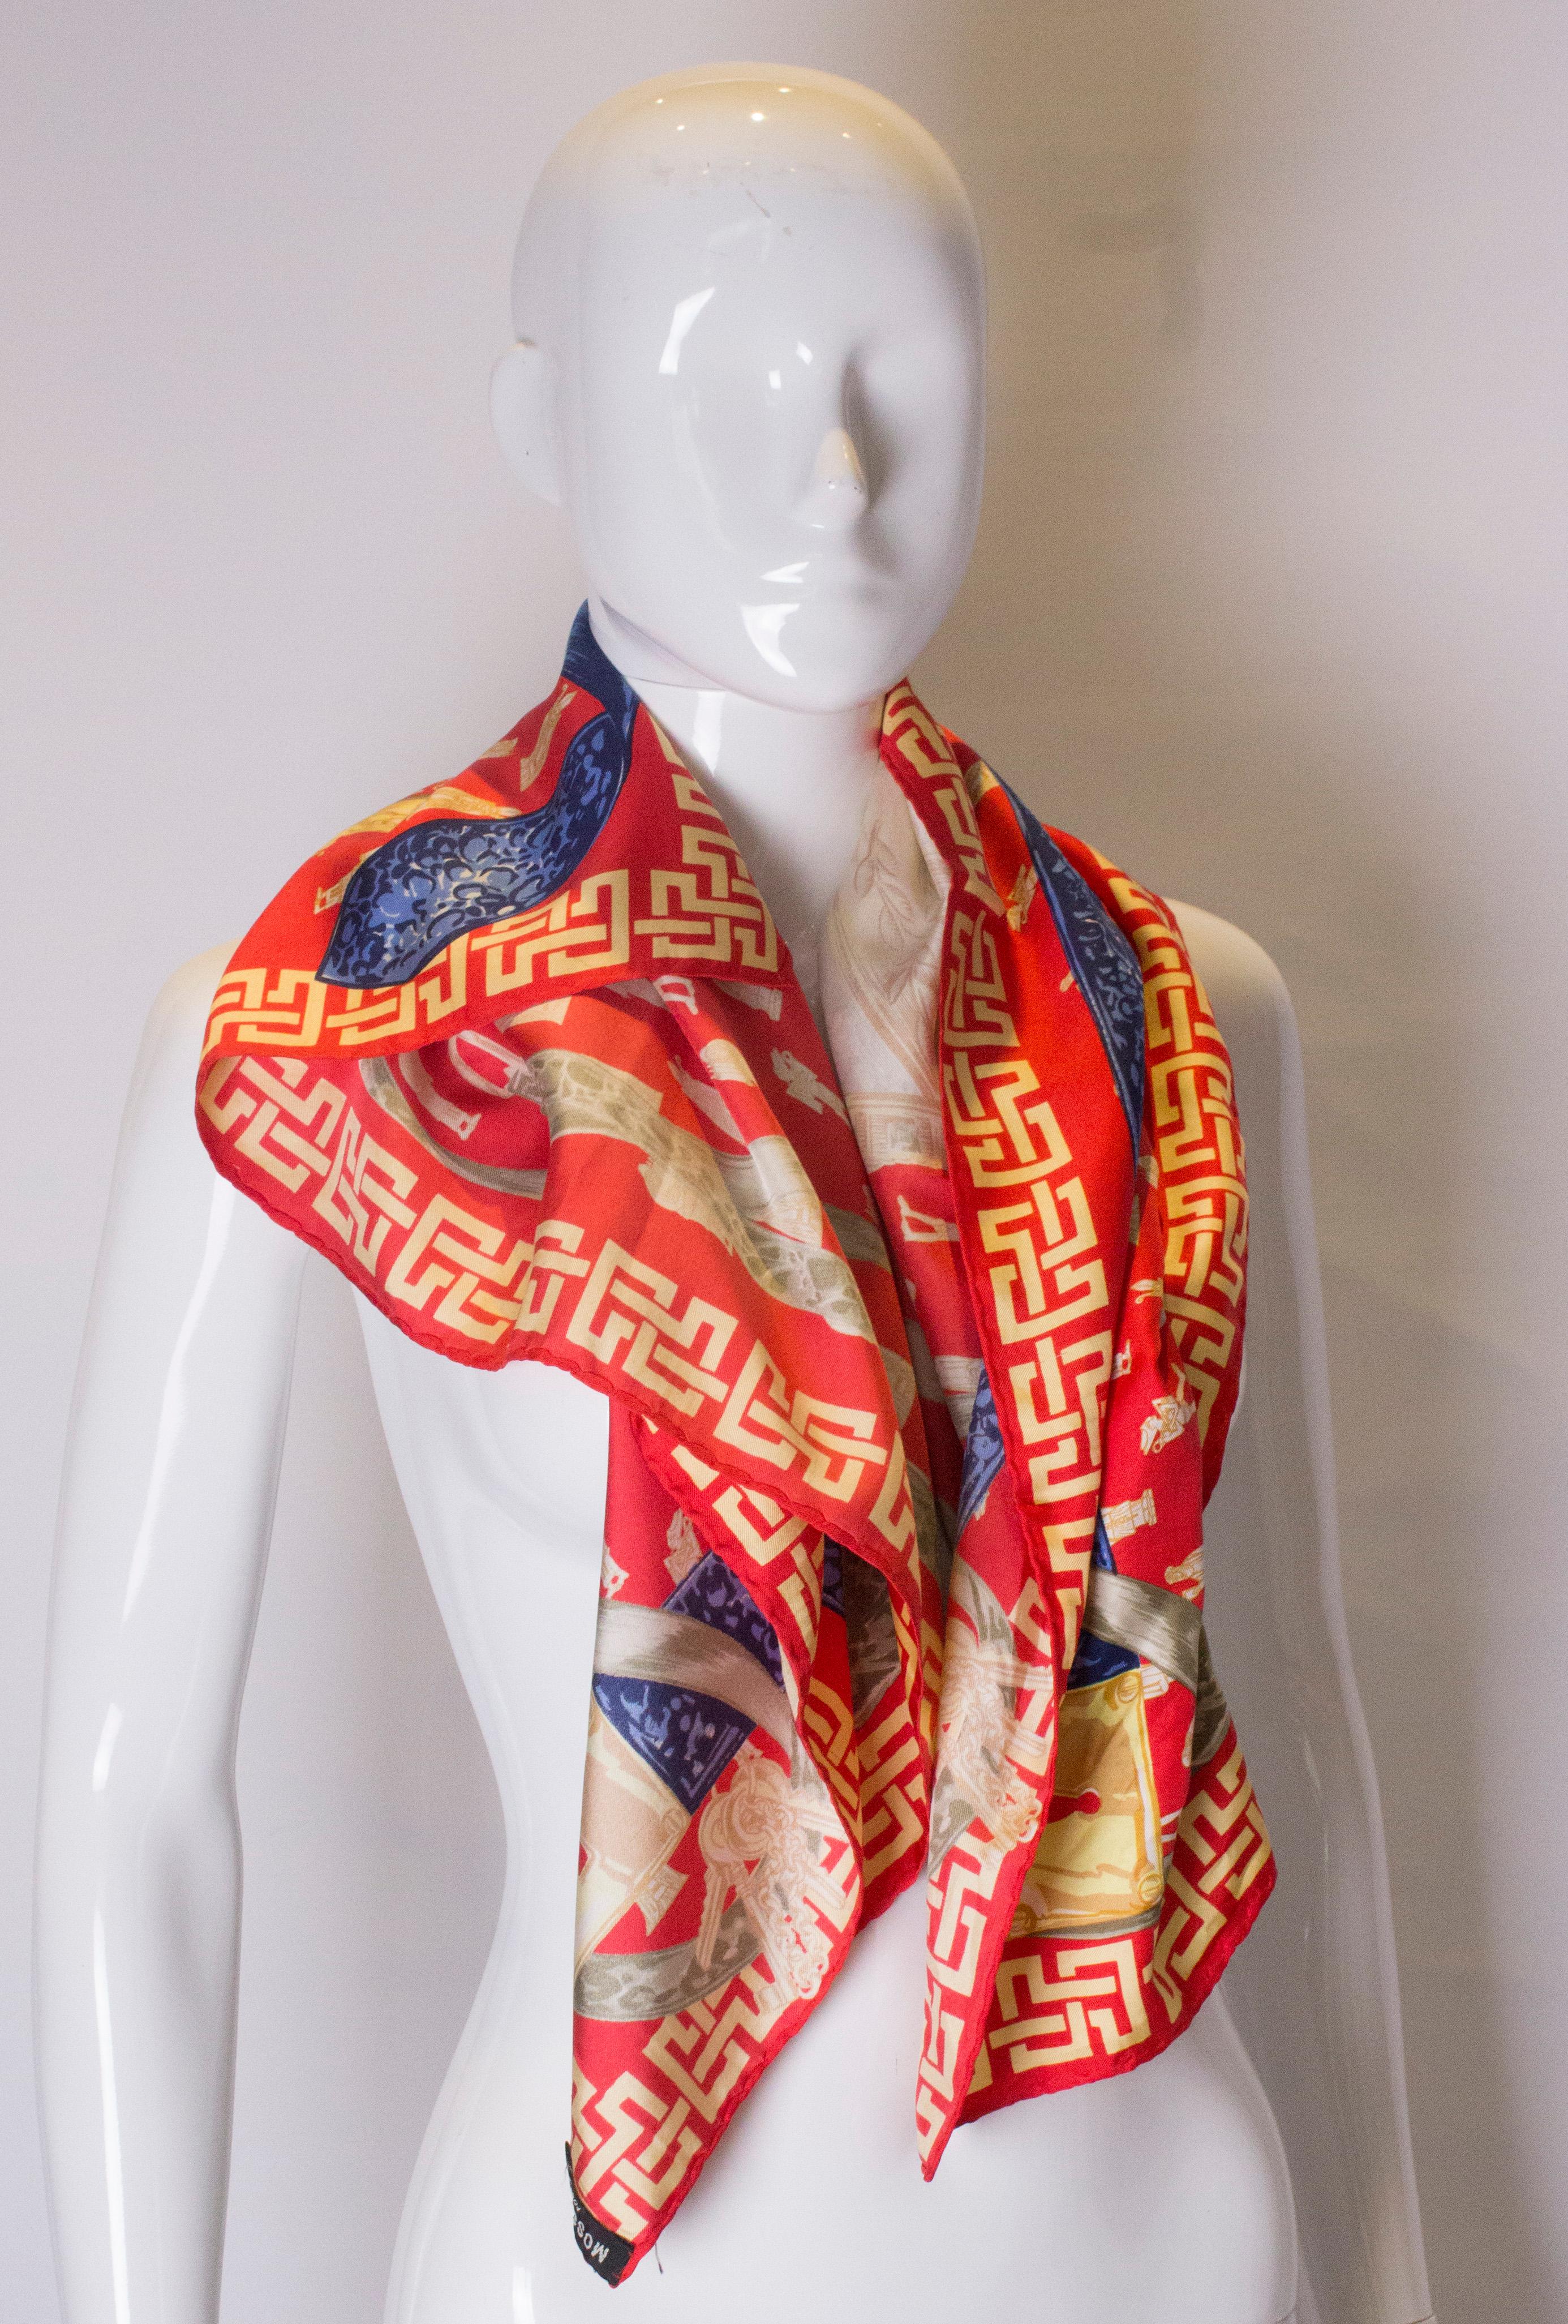 A fun silk scarf by Moschino. The scarf has a red background with gold and blue design.